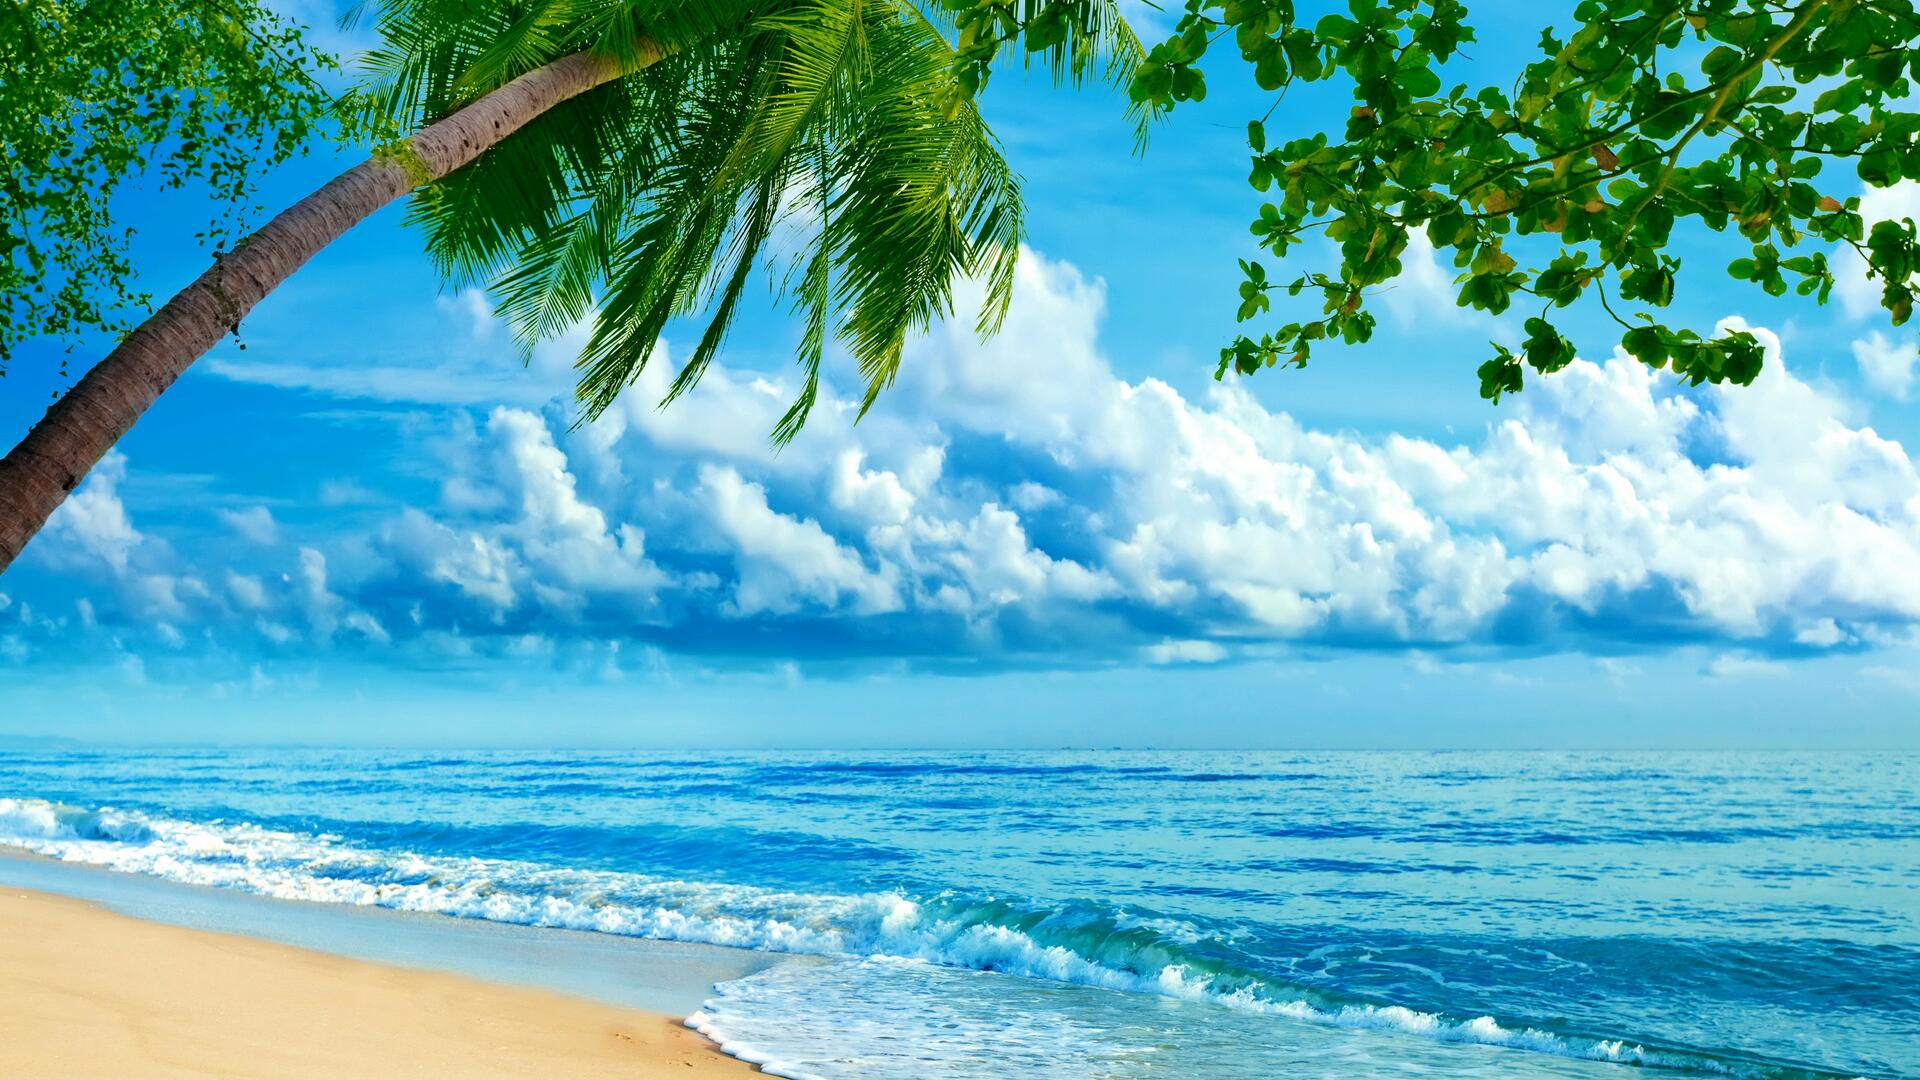 Beach For Laptop Wallpapers